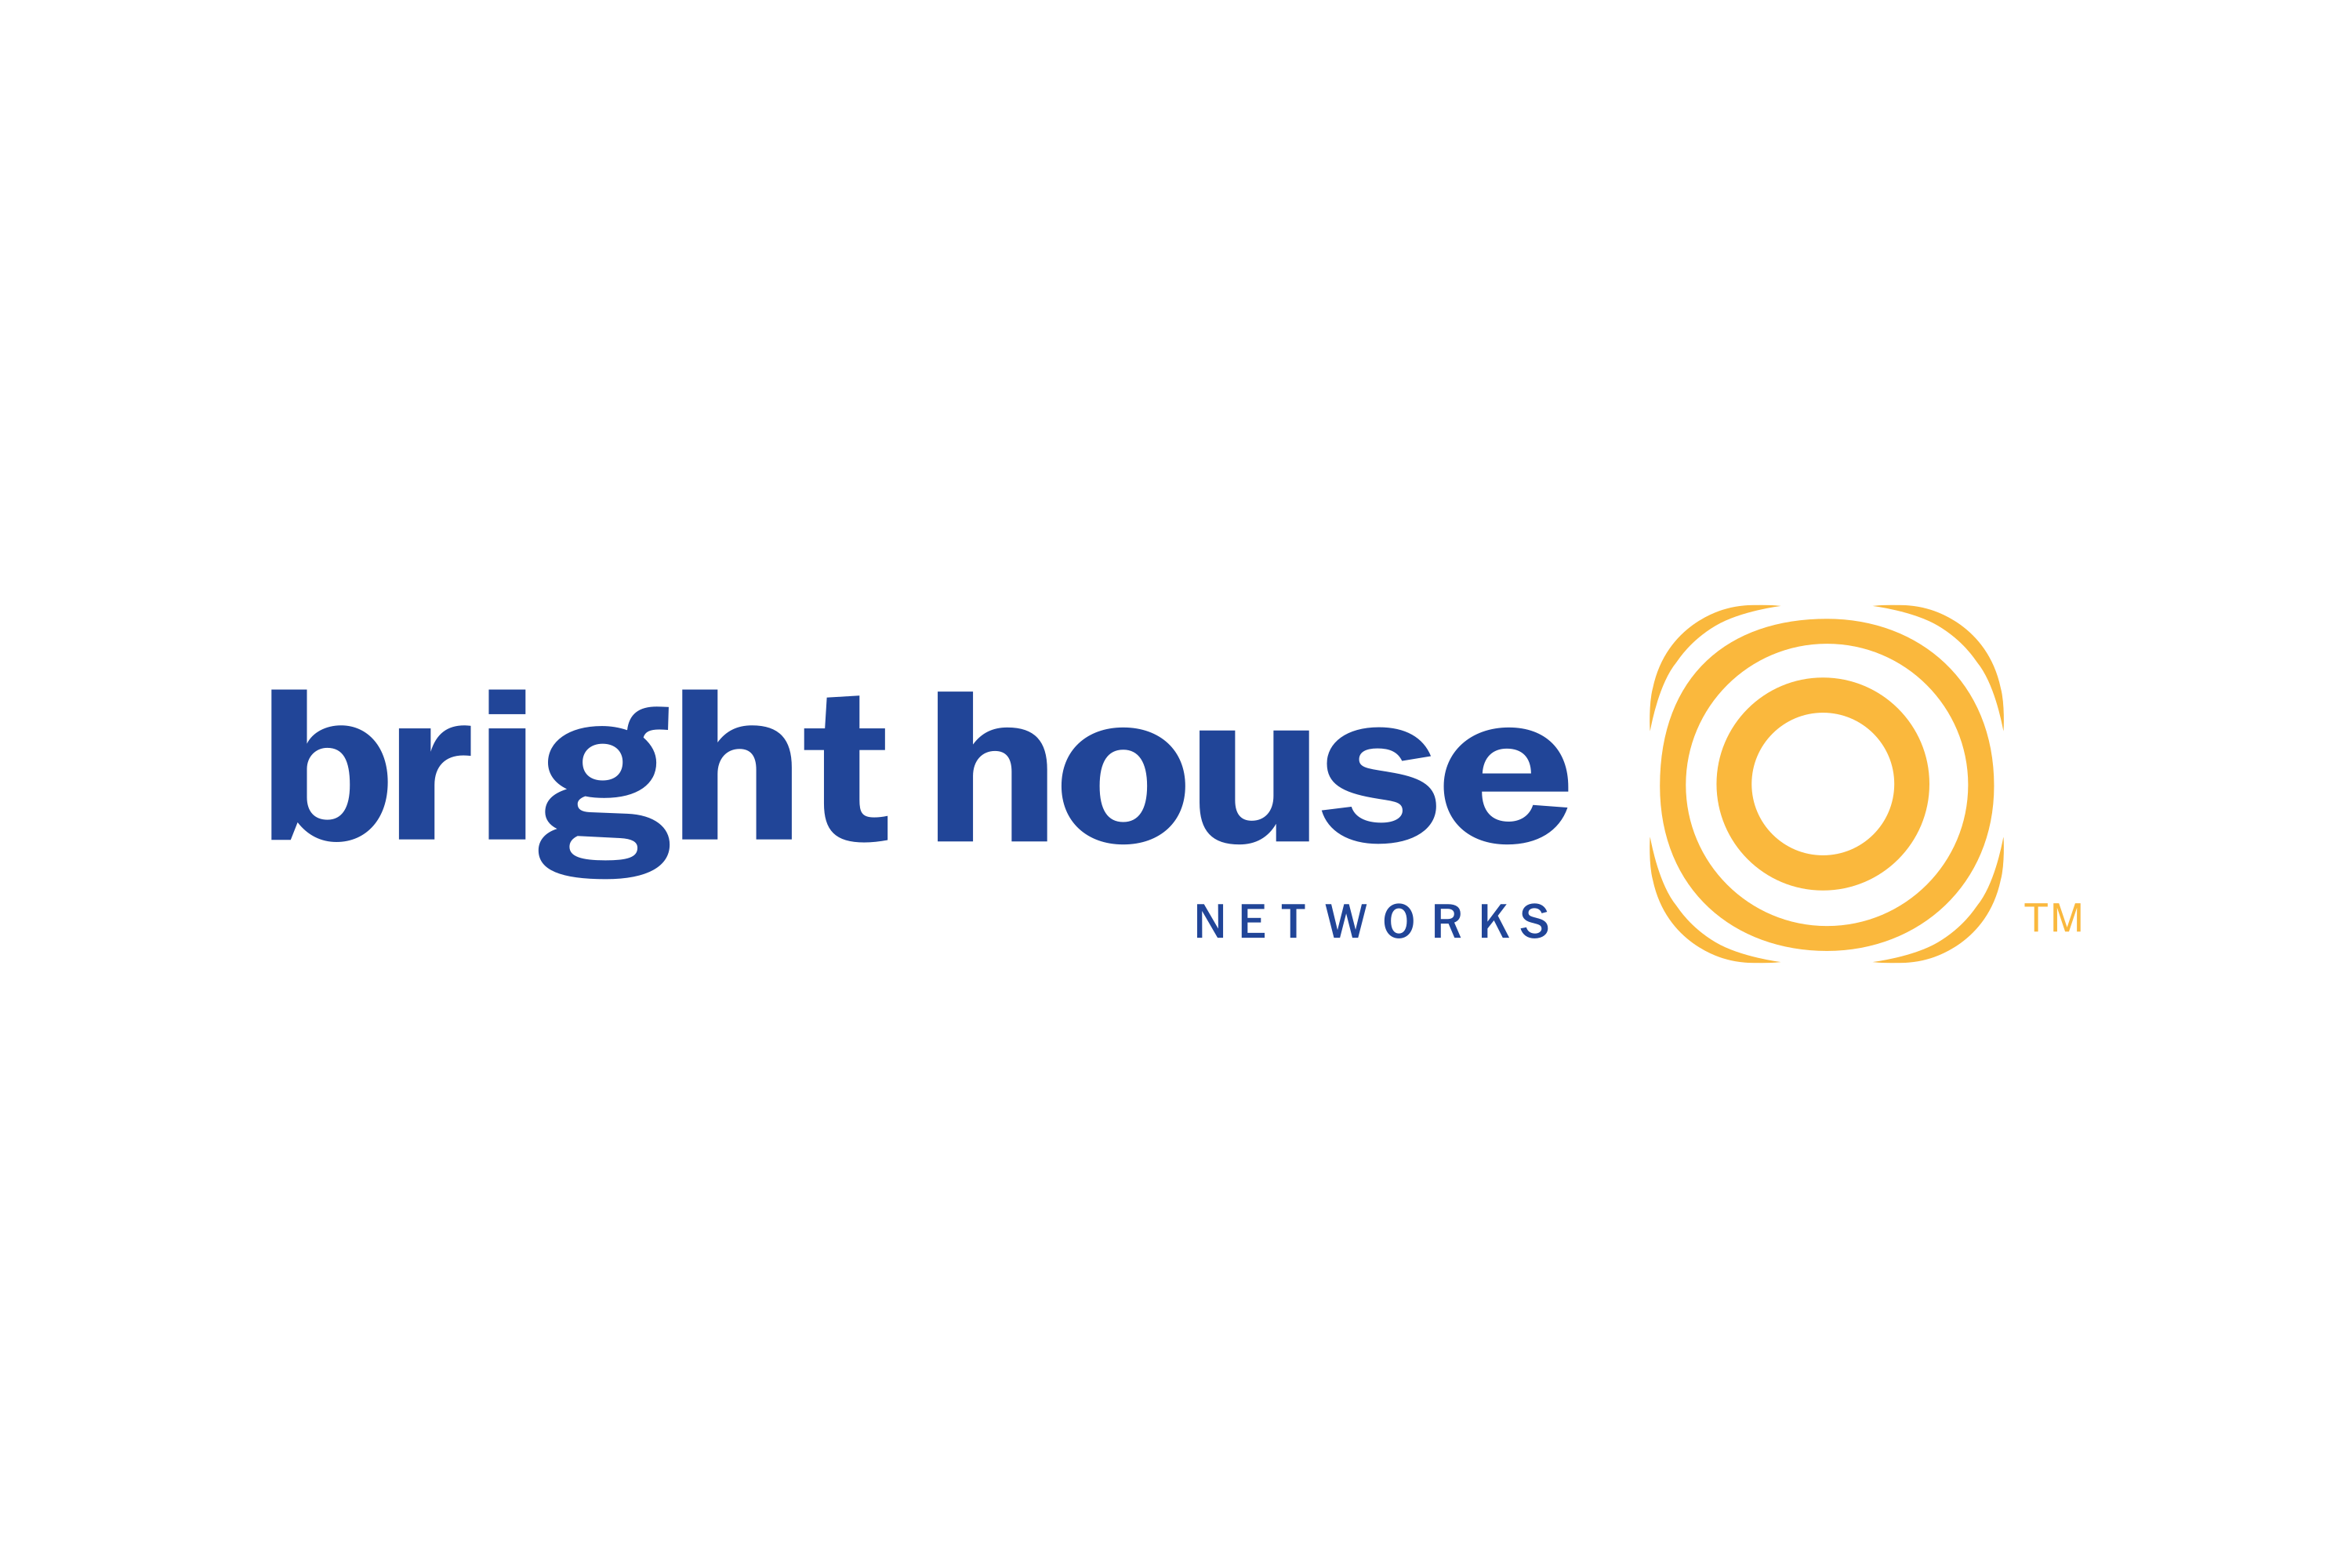 Download Bright House Networks Logo in SVG Vector or PNG File Format